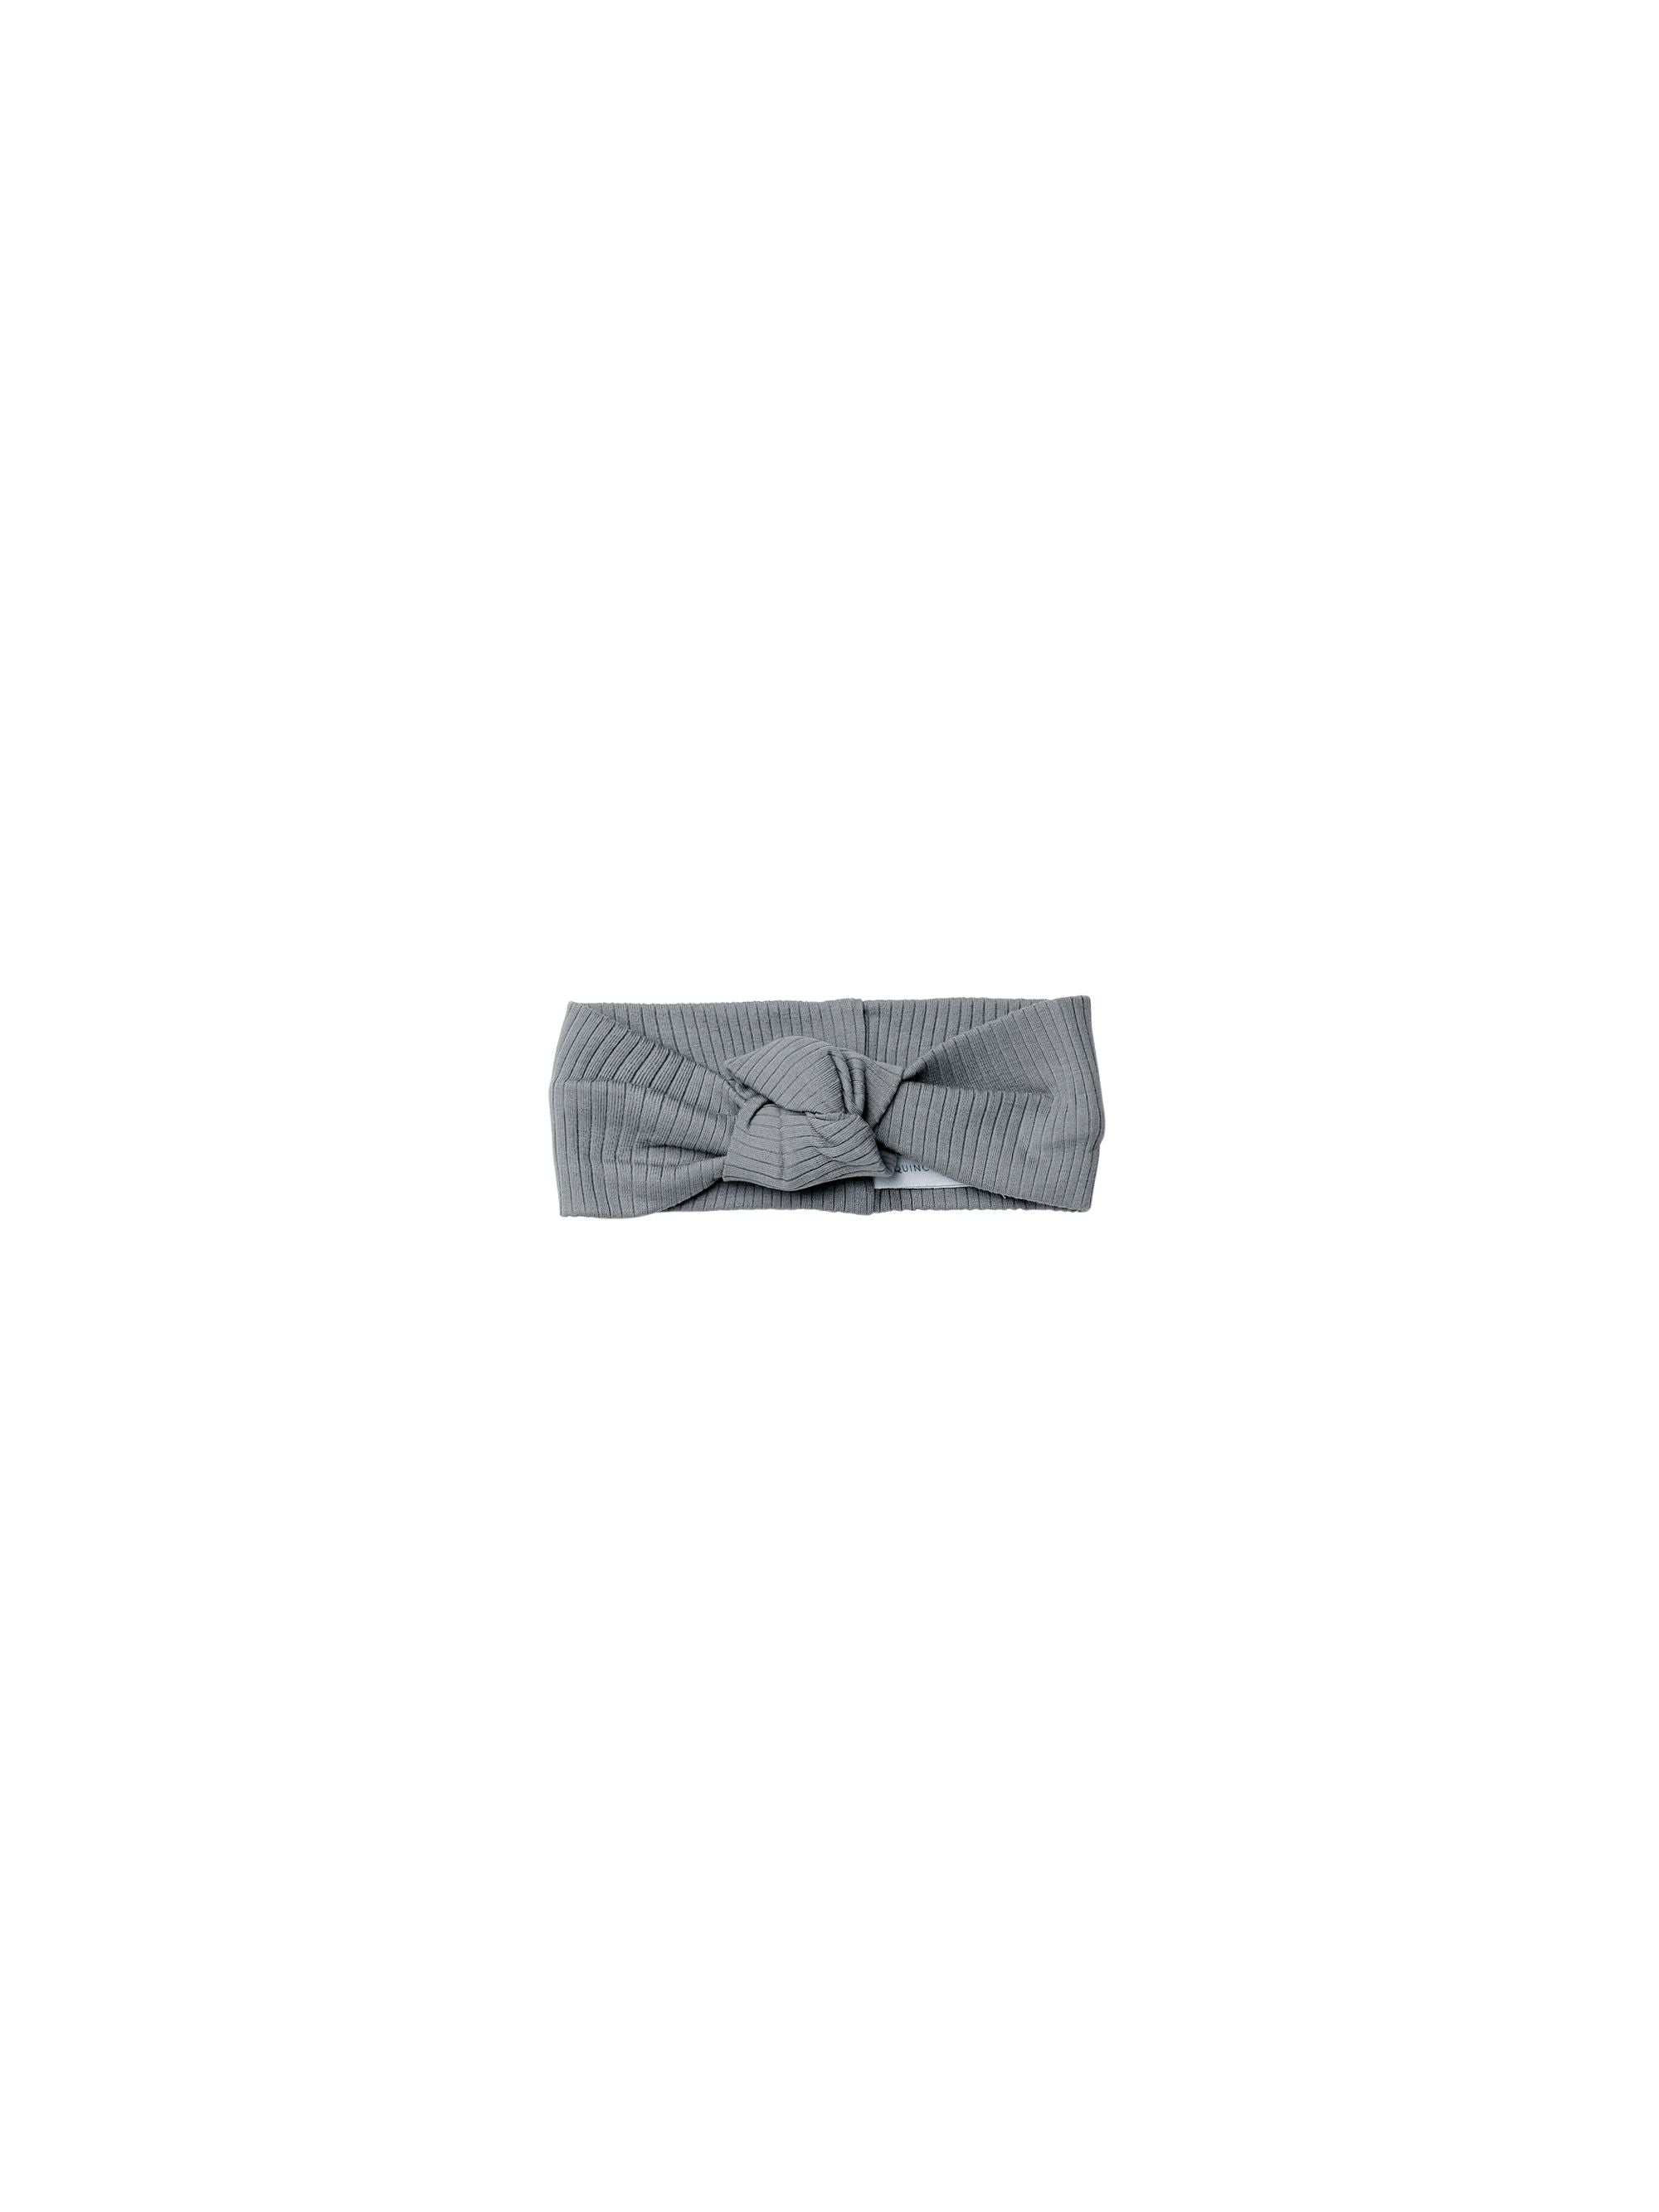 Quincy Mae Knotted Headband | Ocean